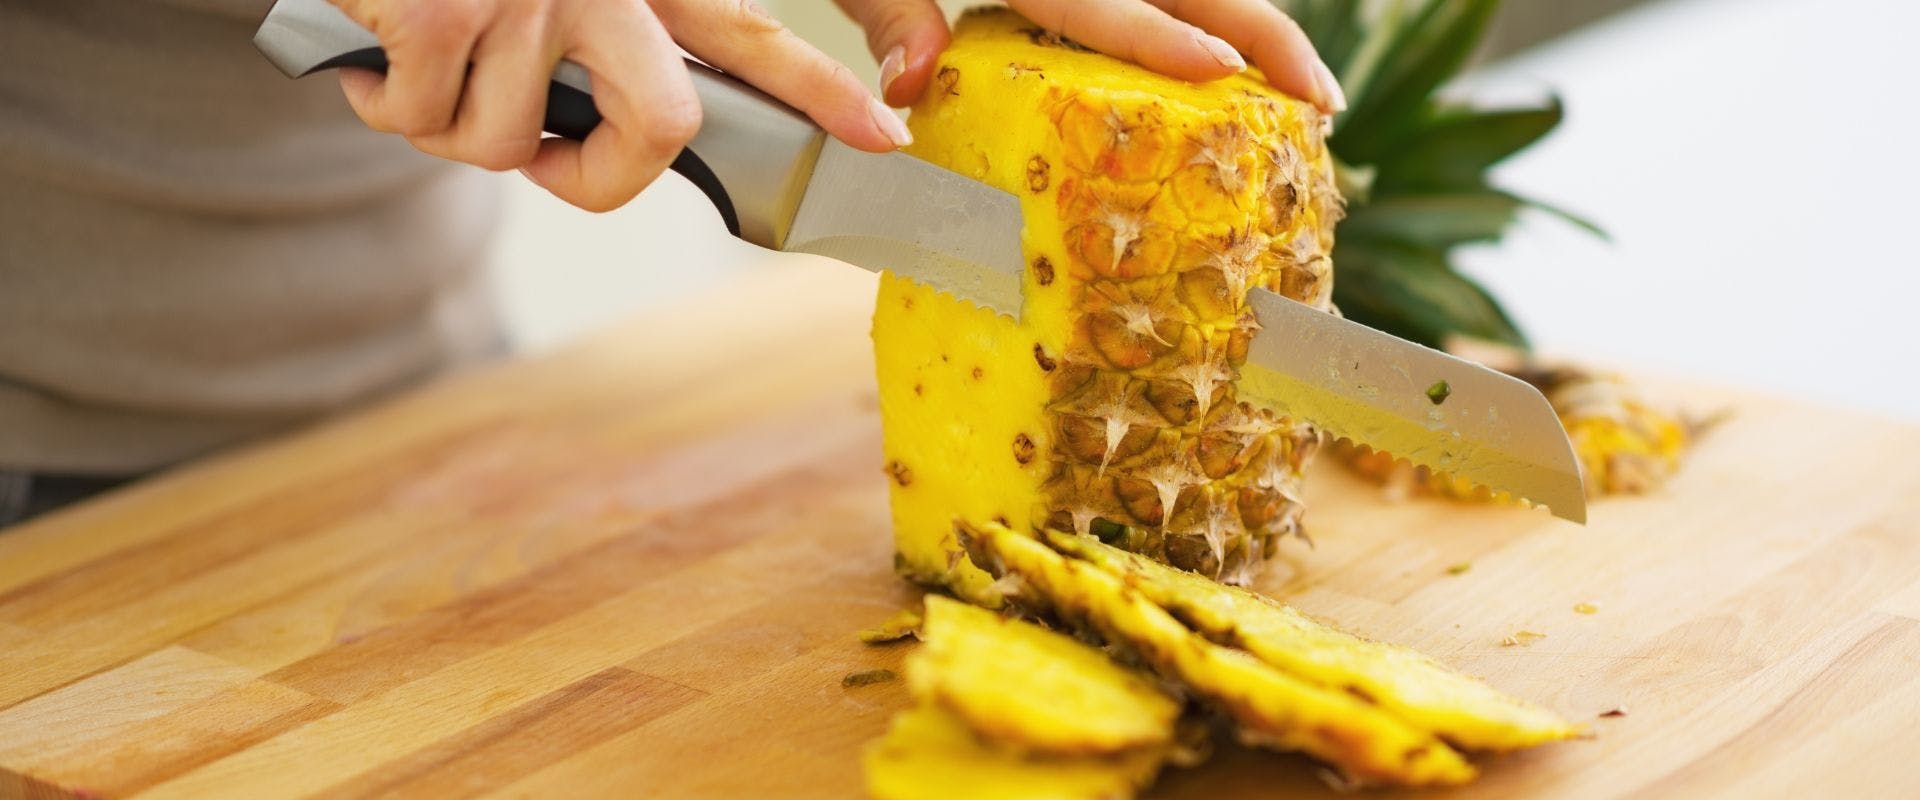 Person slicing pineapple